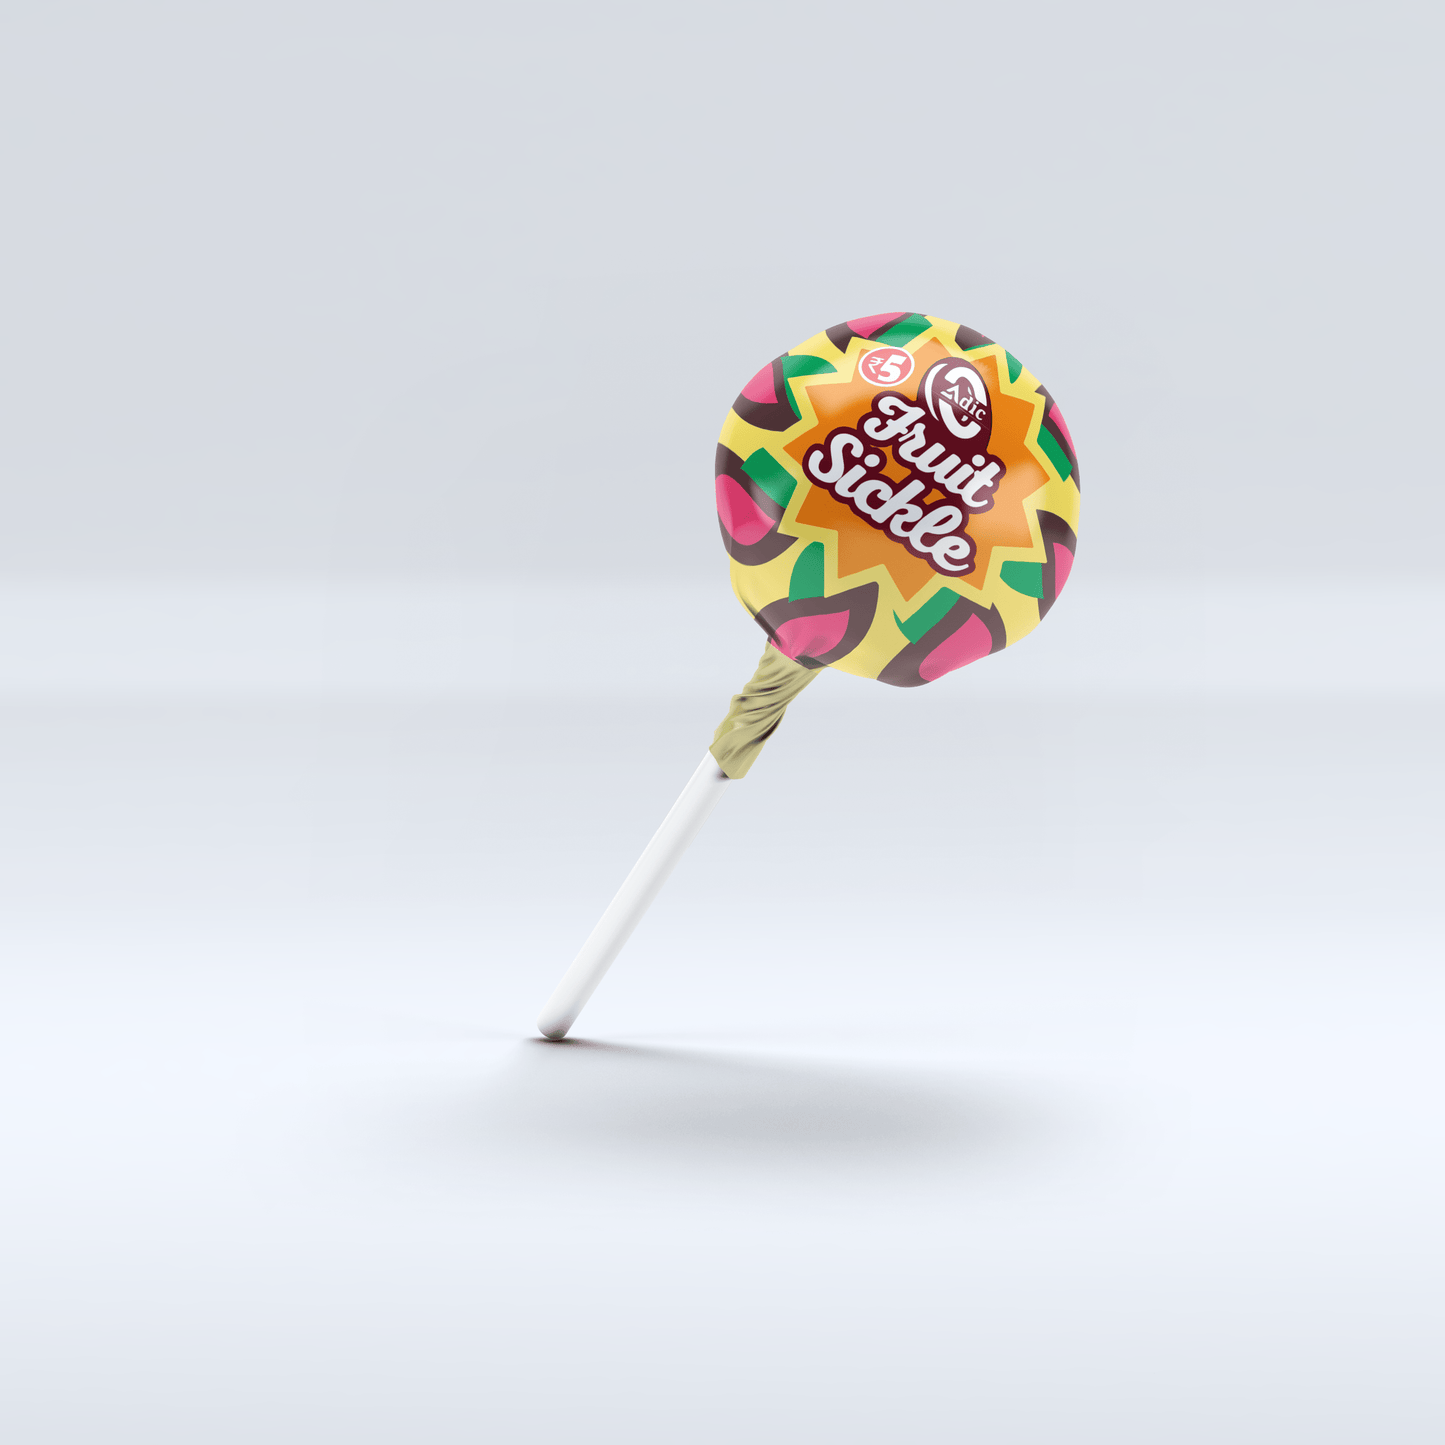 Adic’s Fruitsickle - Fruitilicious lollipops filled with tasty and fun treats